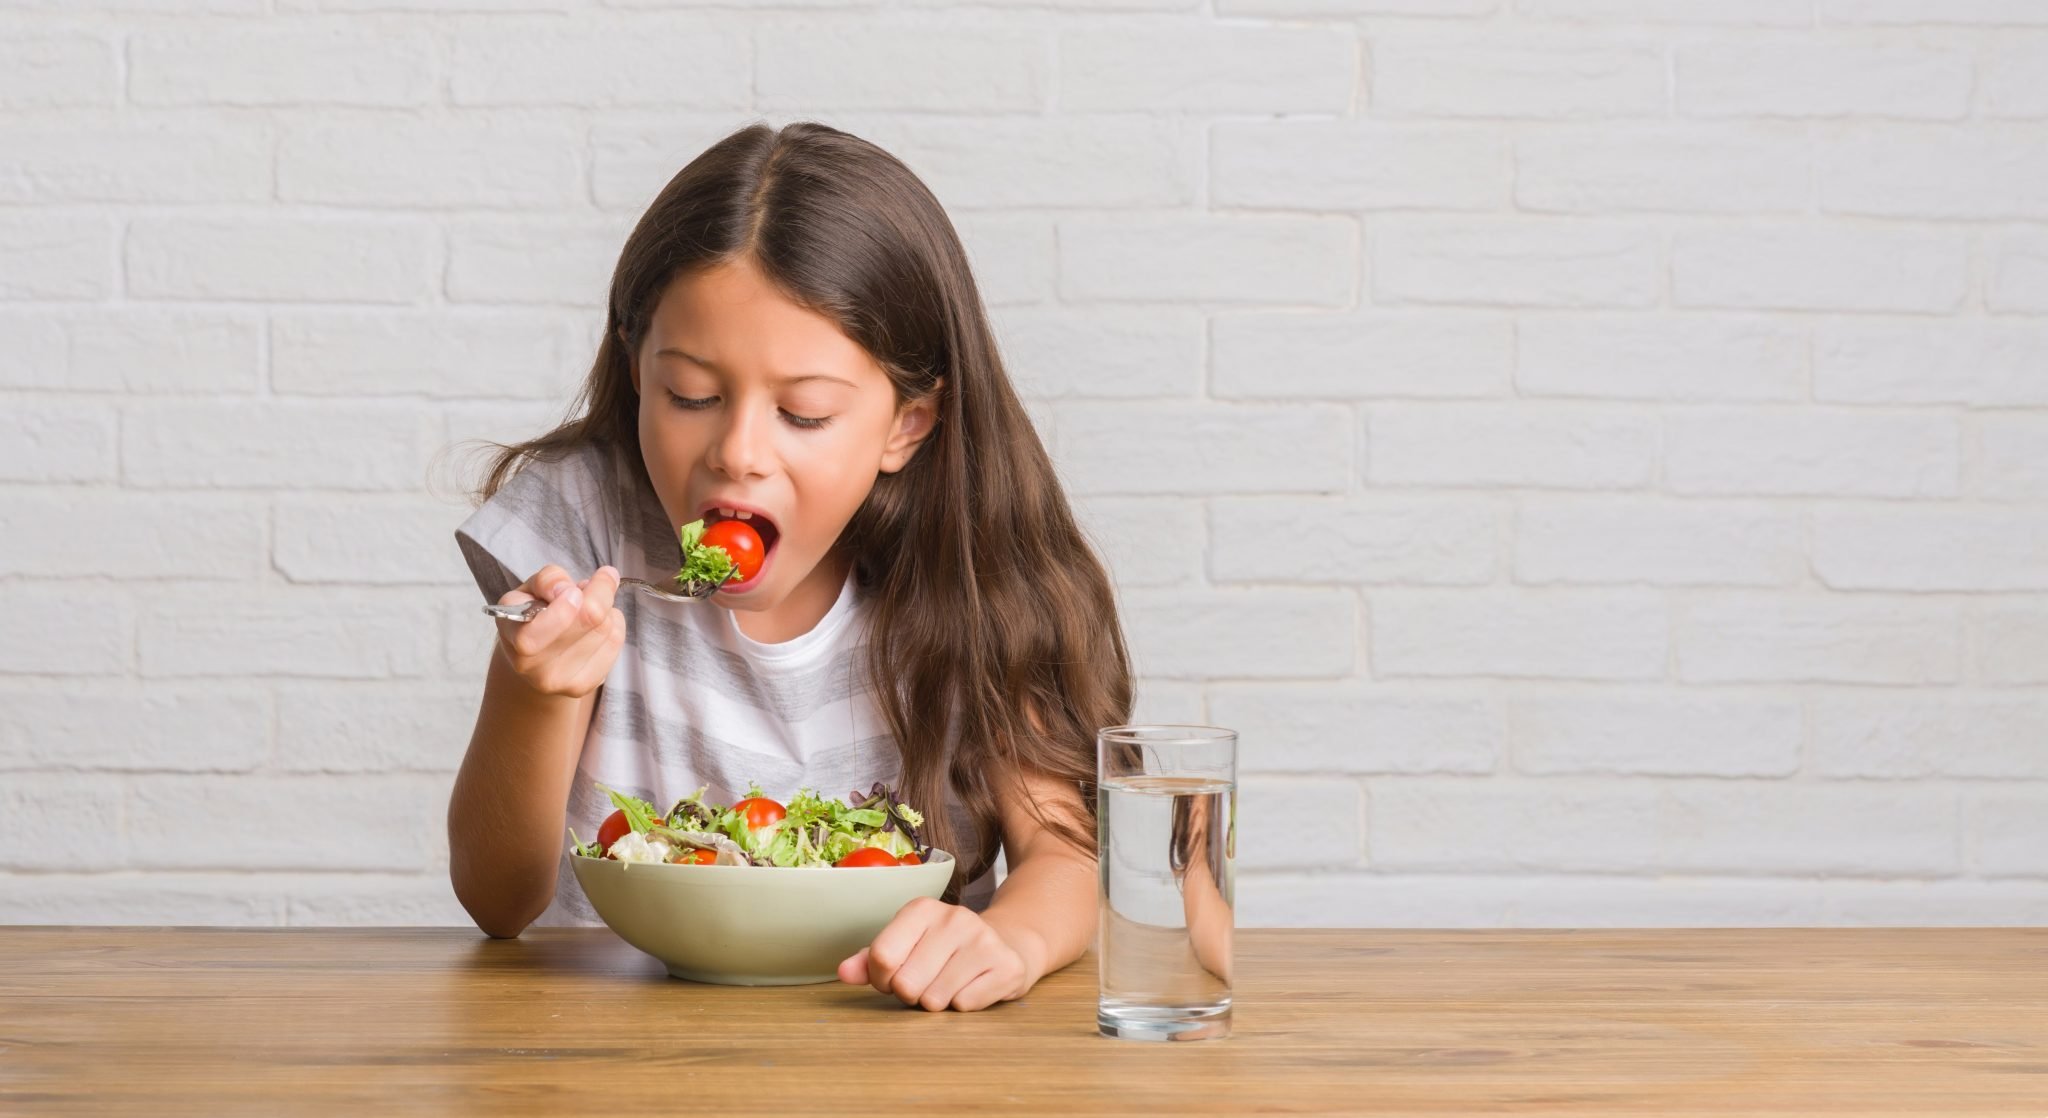 myths-facts-about-healthy-food-for-kids